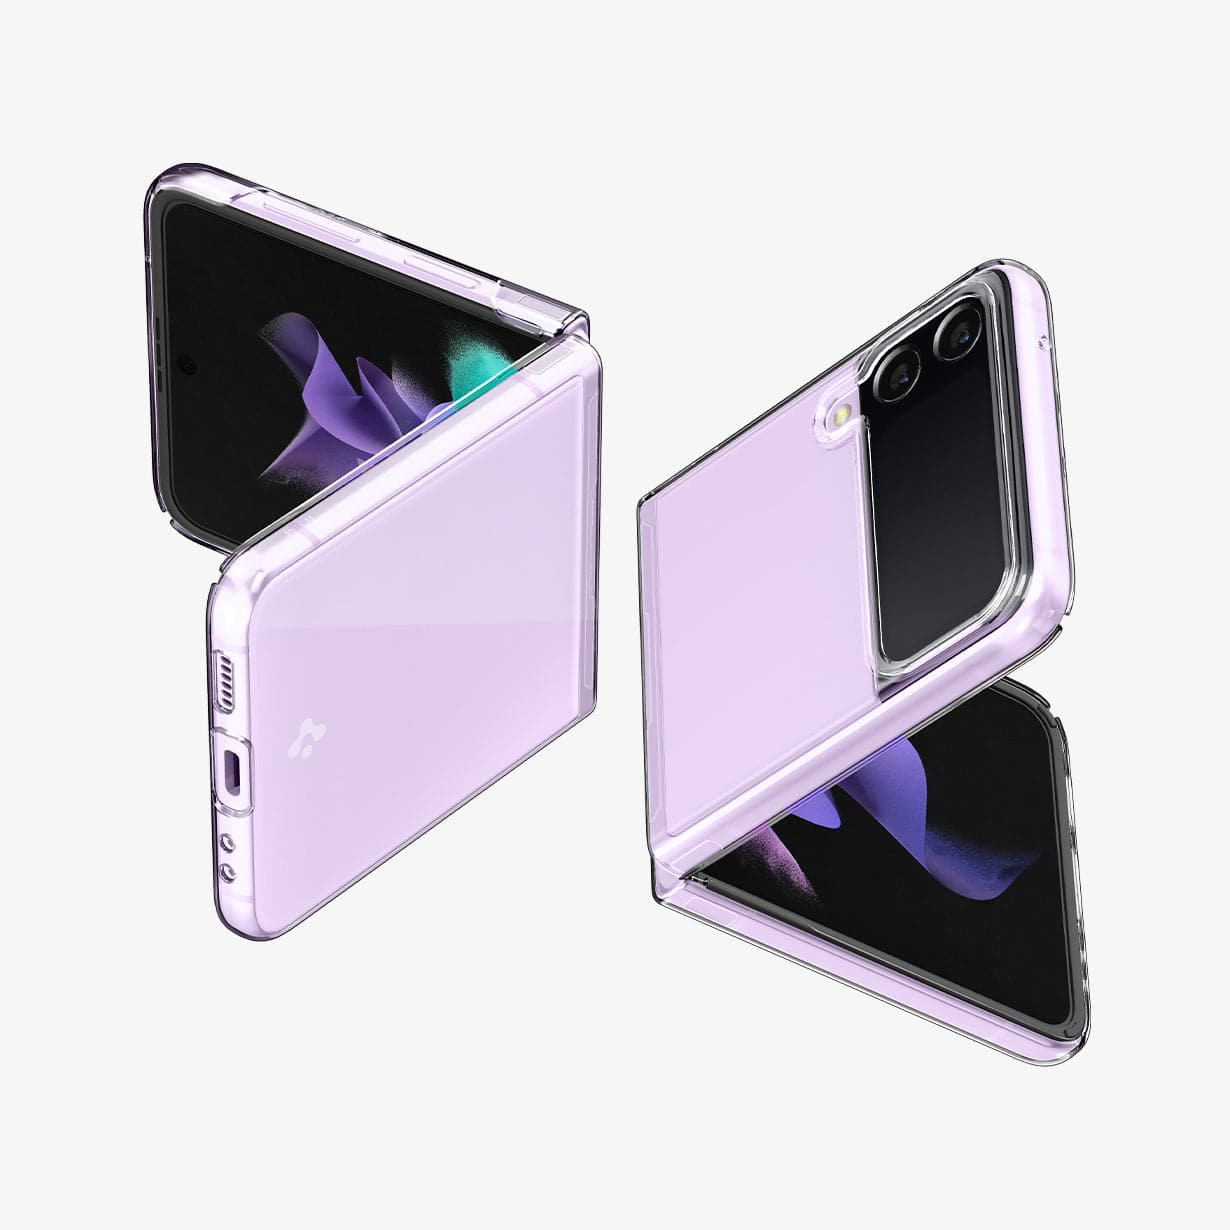 ACS03085 - Galaxy Z Flip 3 Case AirSkin in crystal clear showing the back, front, side, top and bottom